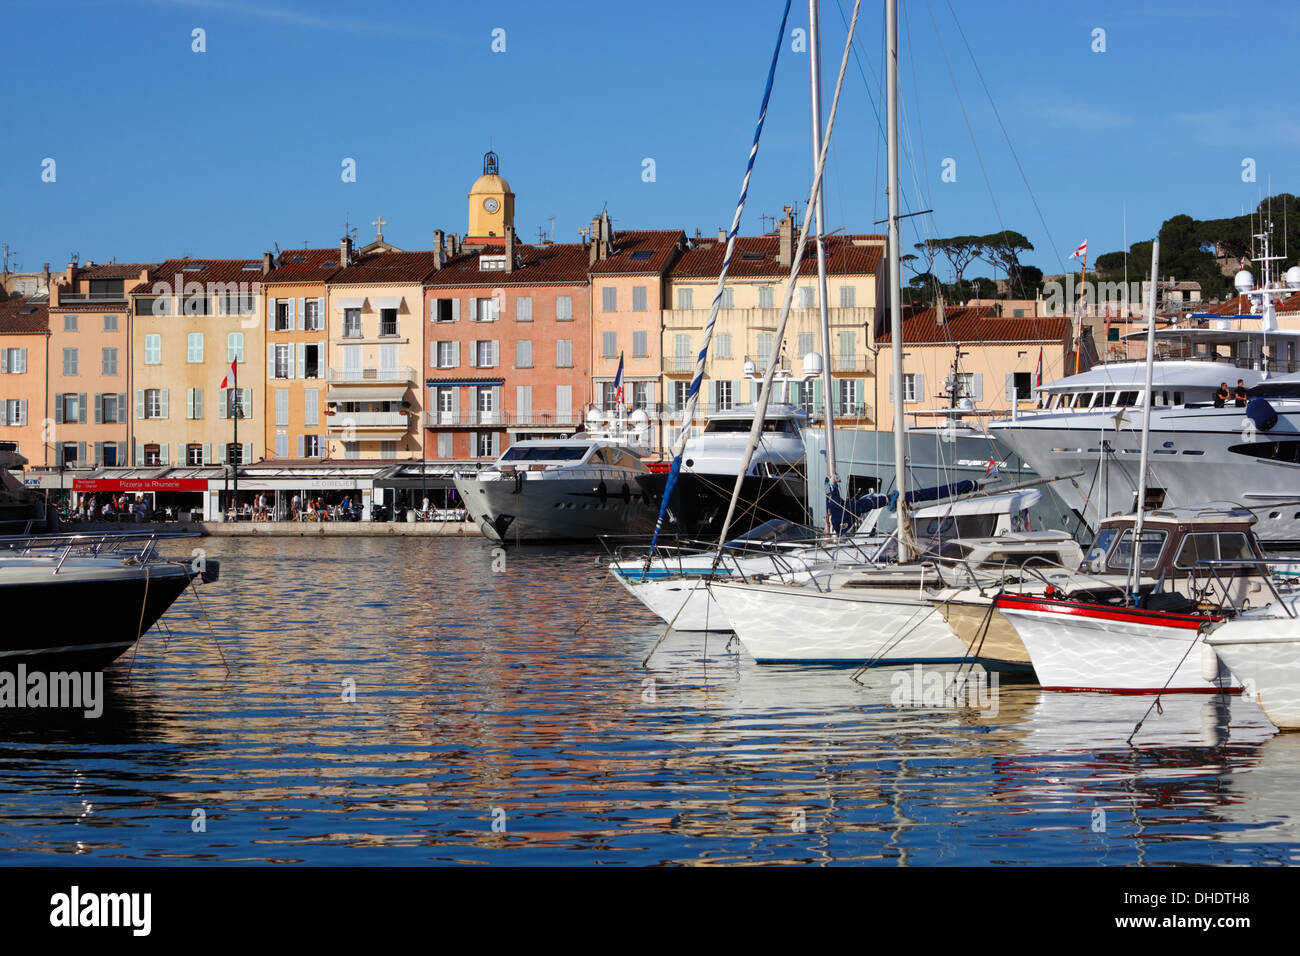 Yachts in harbour of old town, Saint-Tropez, Var, Provence-Alpes-Cote d'Azur, Provence, France, Mediterranean, Europe Stock Photo